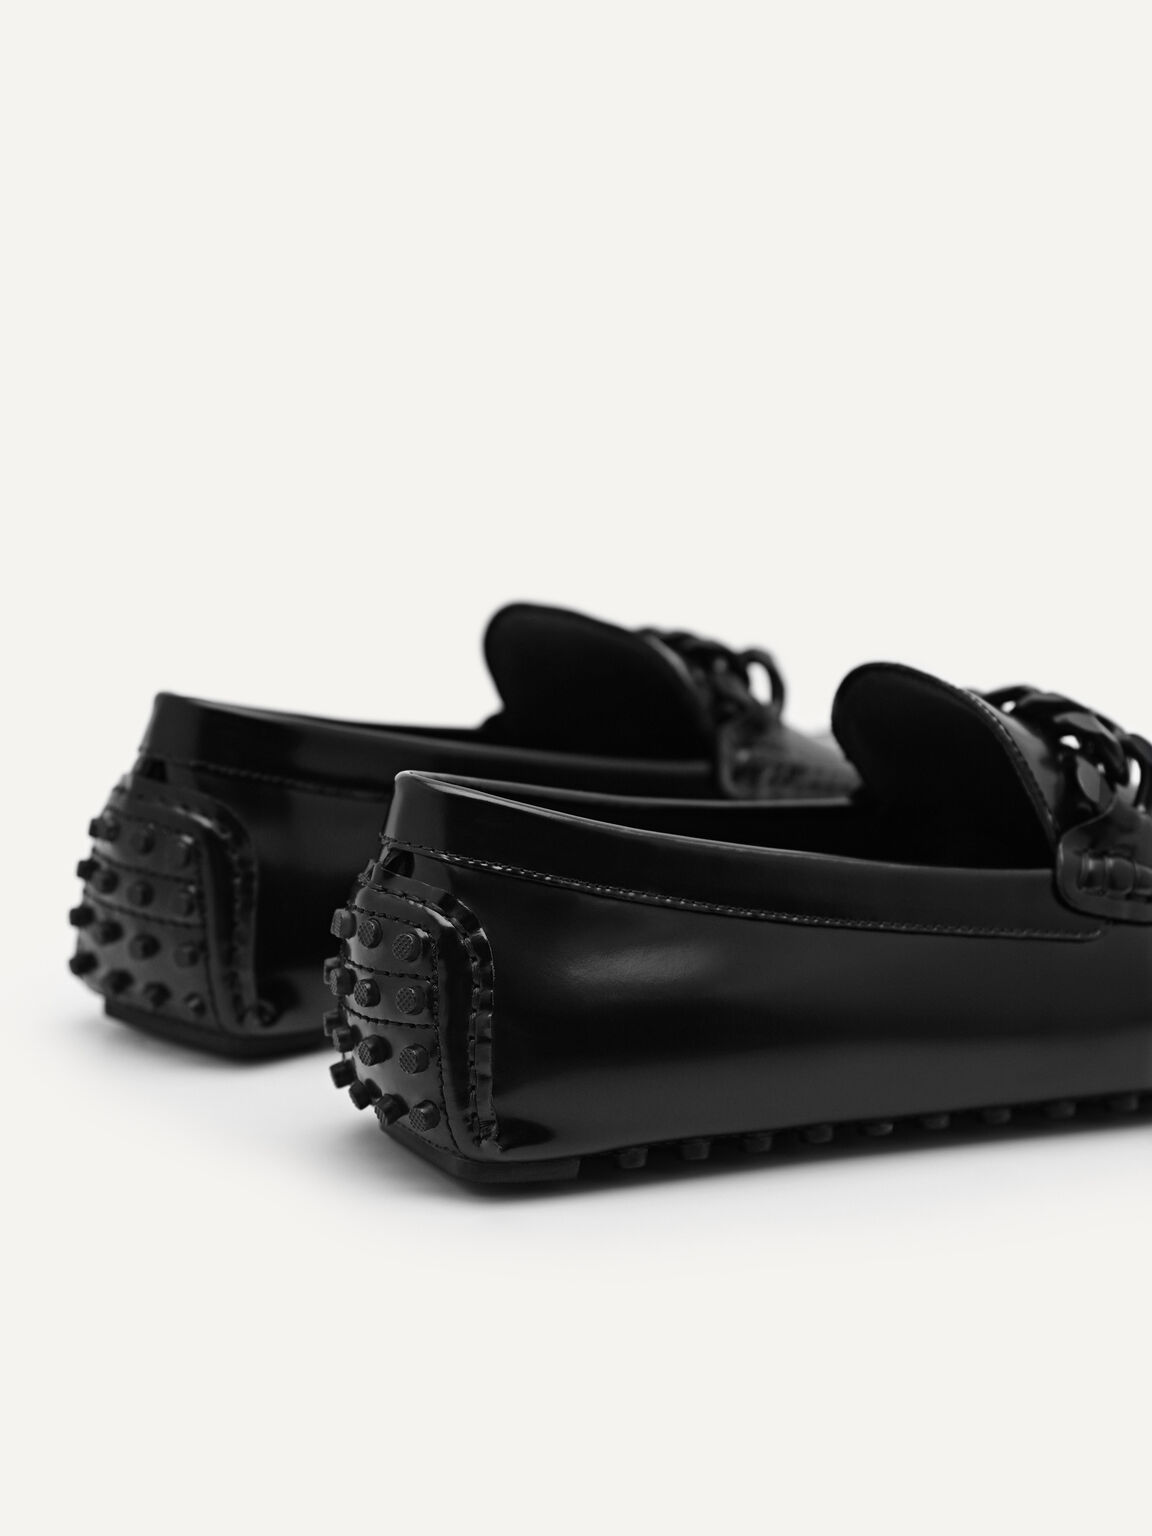 Leather Driving Moccassins with Curb Chain Saddle, Black